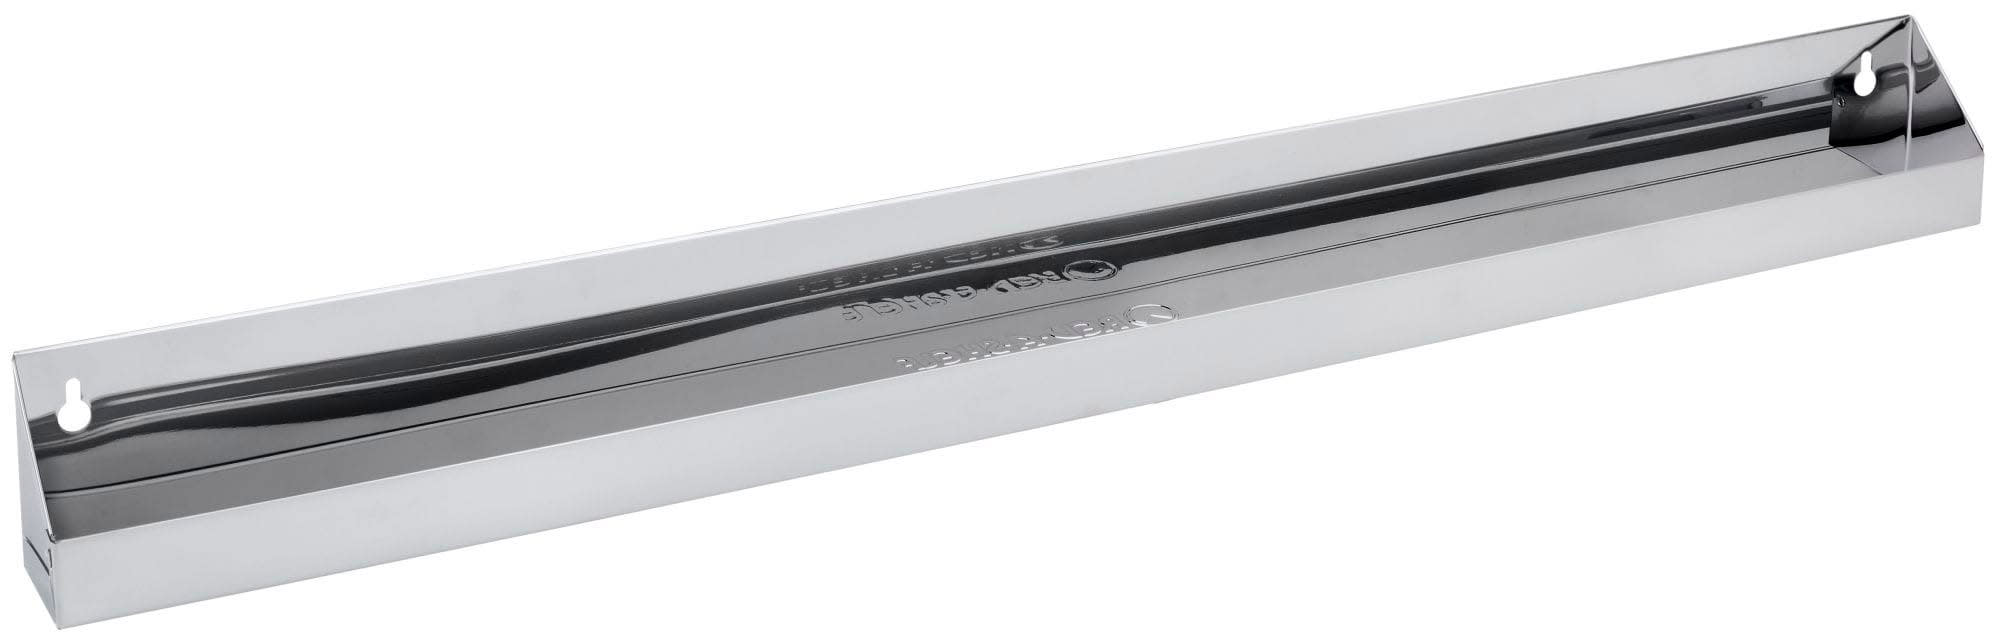 Rev-A-Shelf 6581-31-5 6581 Series 31 Stainless Steel Sink Front Tip-Out Tray 